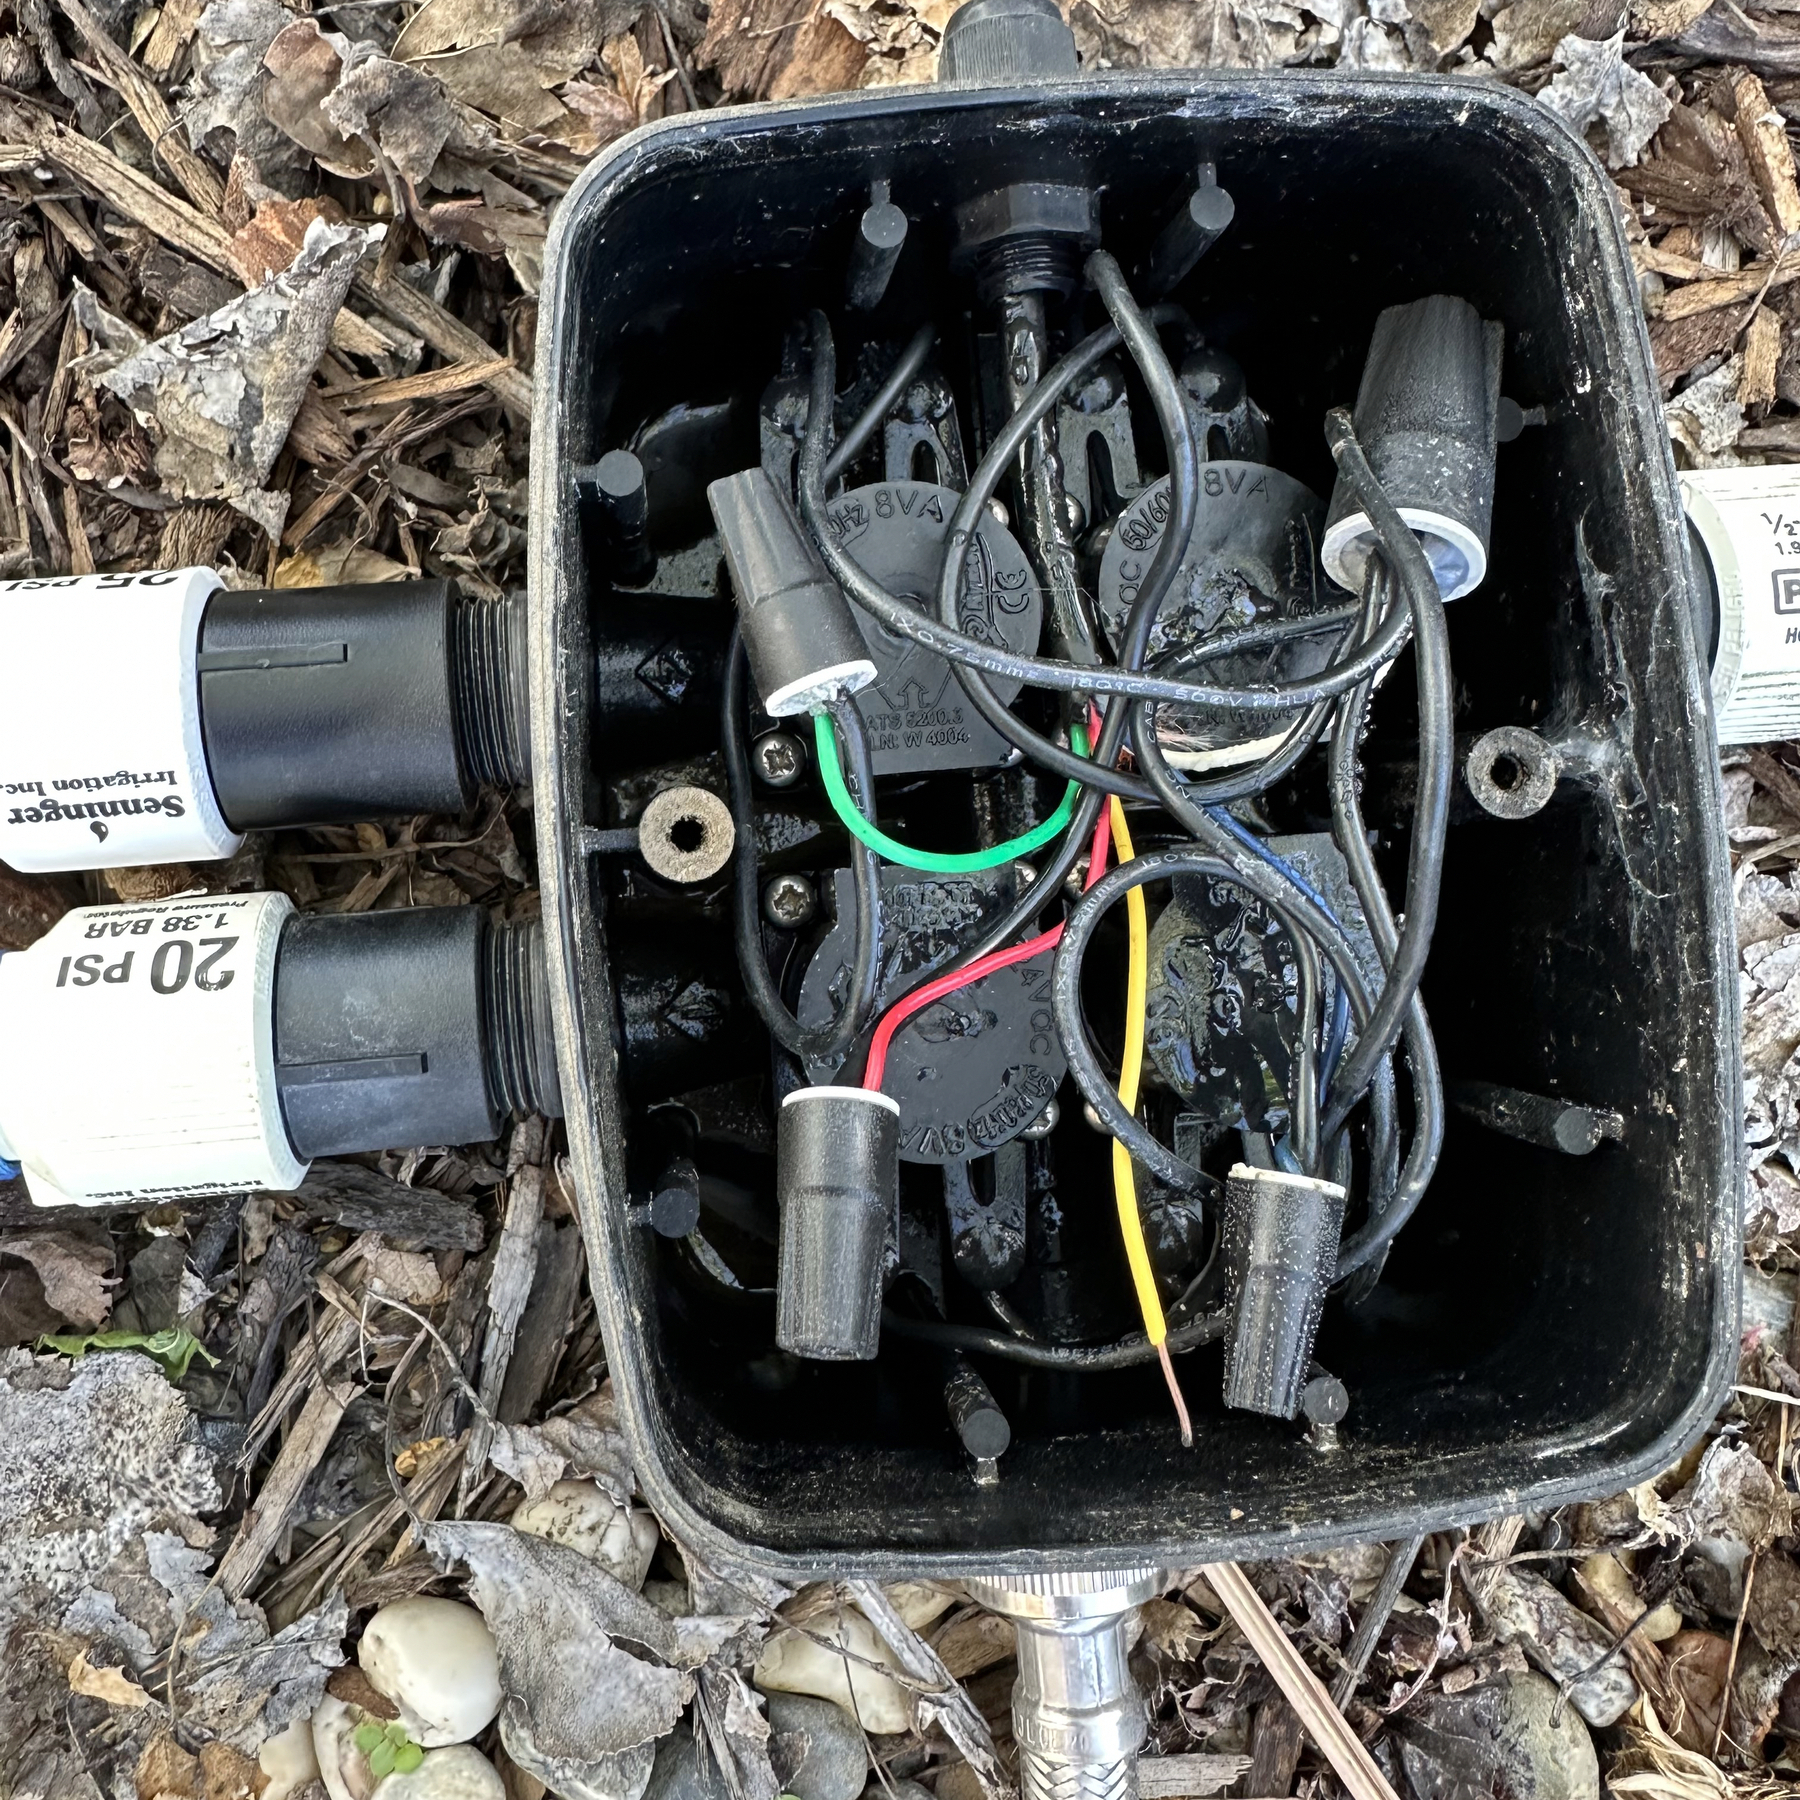 A irrigation valve box with wires tied together by wire nuts including the green wire. The small box sits atop some gravel and has a stainless steel braided hose providing input water. There are 20-25 GPH pressure regulators and adapters to drip irrigation hoses.